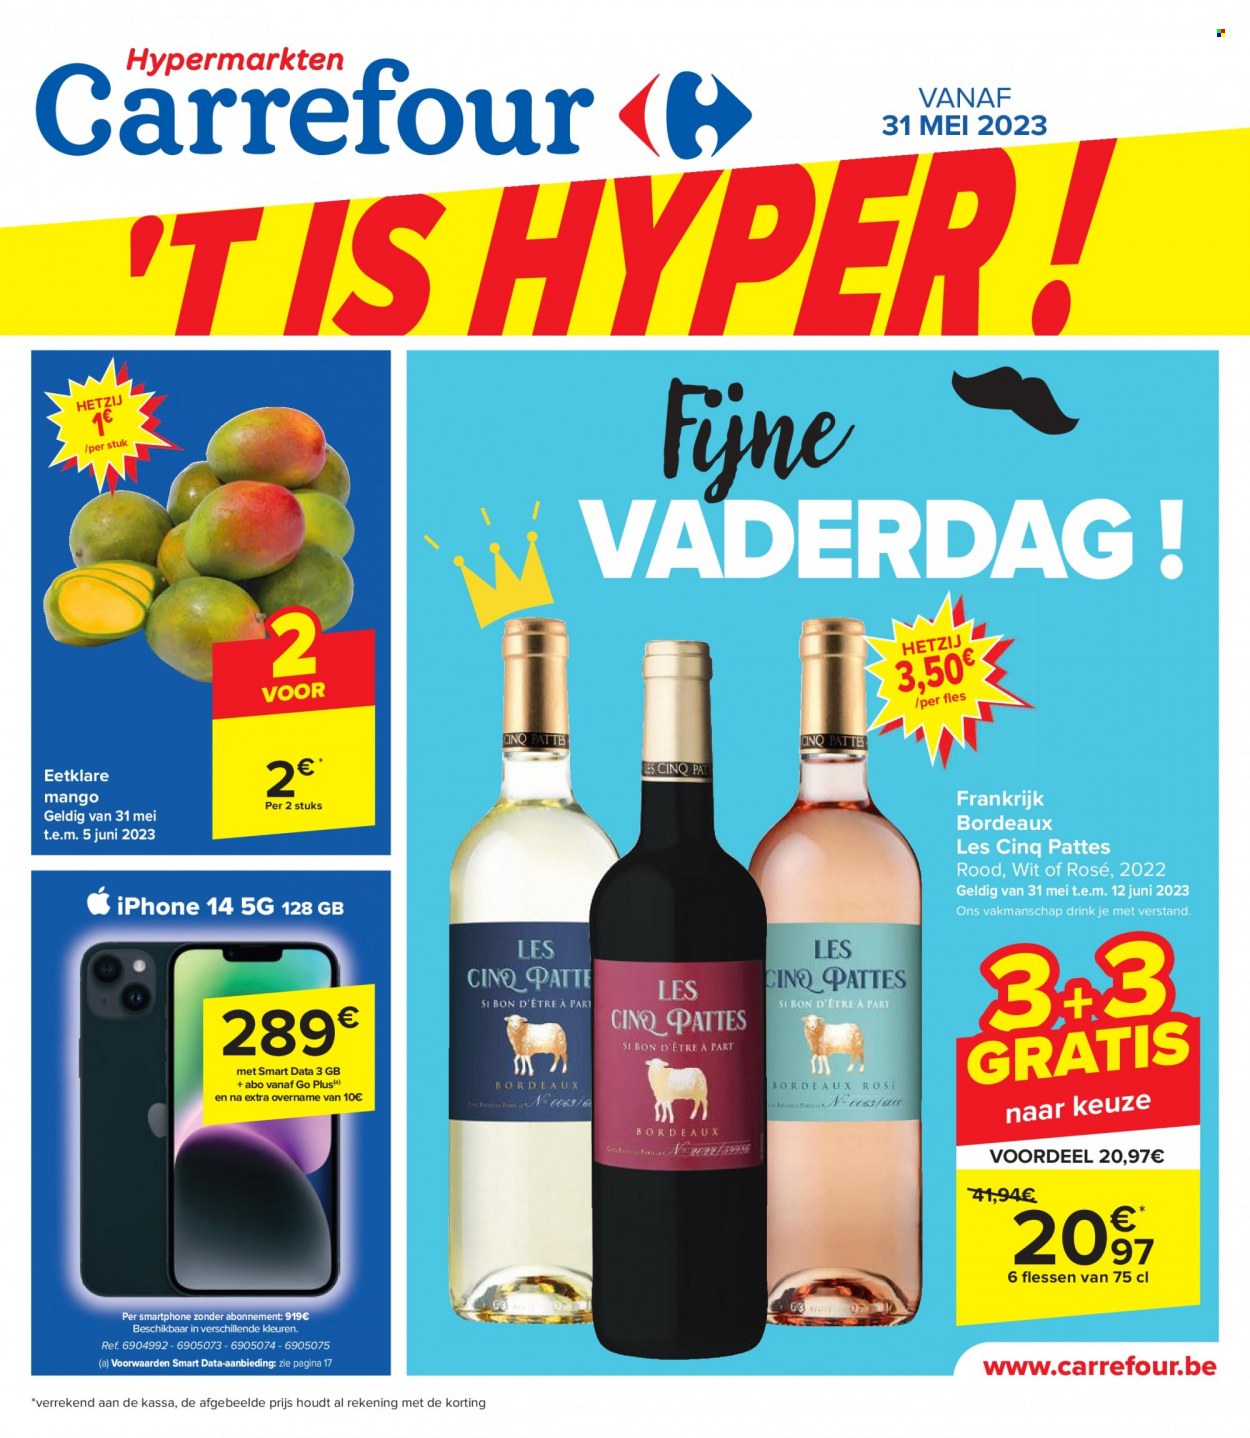 Catalogue Carrefour hypermarkt - 31.5.2023 - 12.6.2023. Page 1.